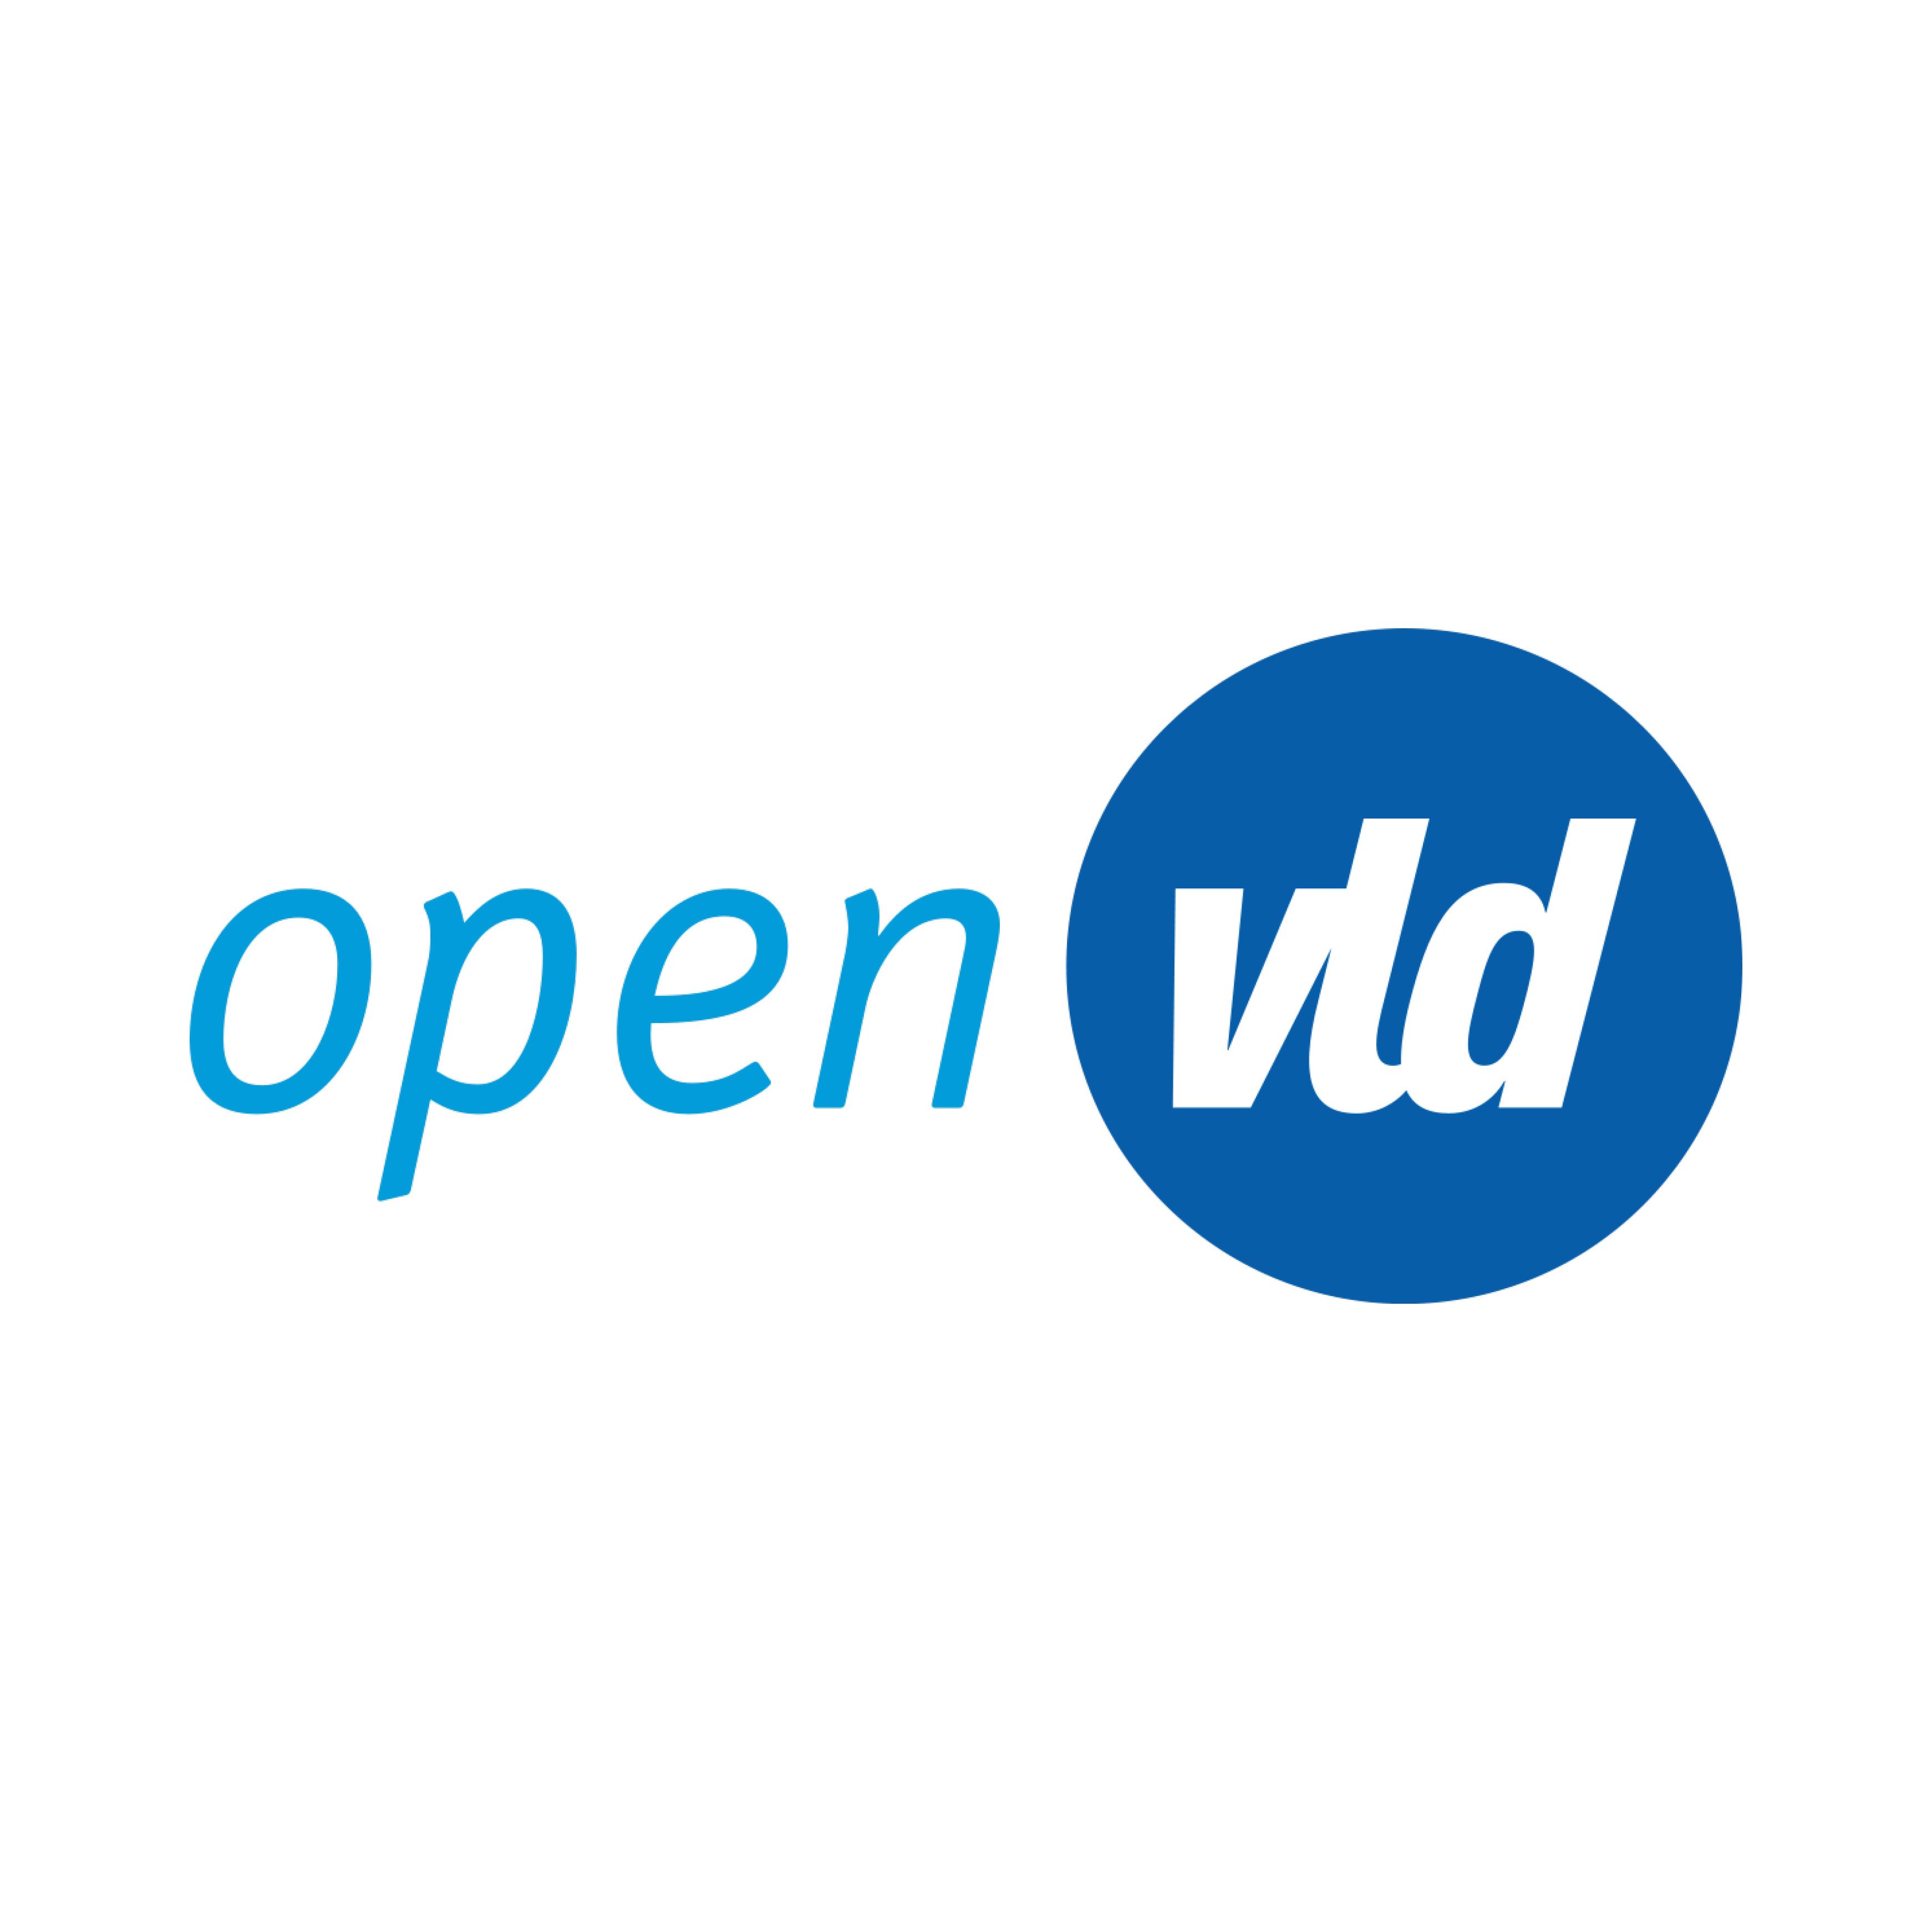 Openvld